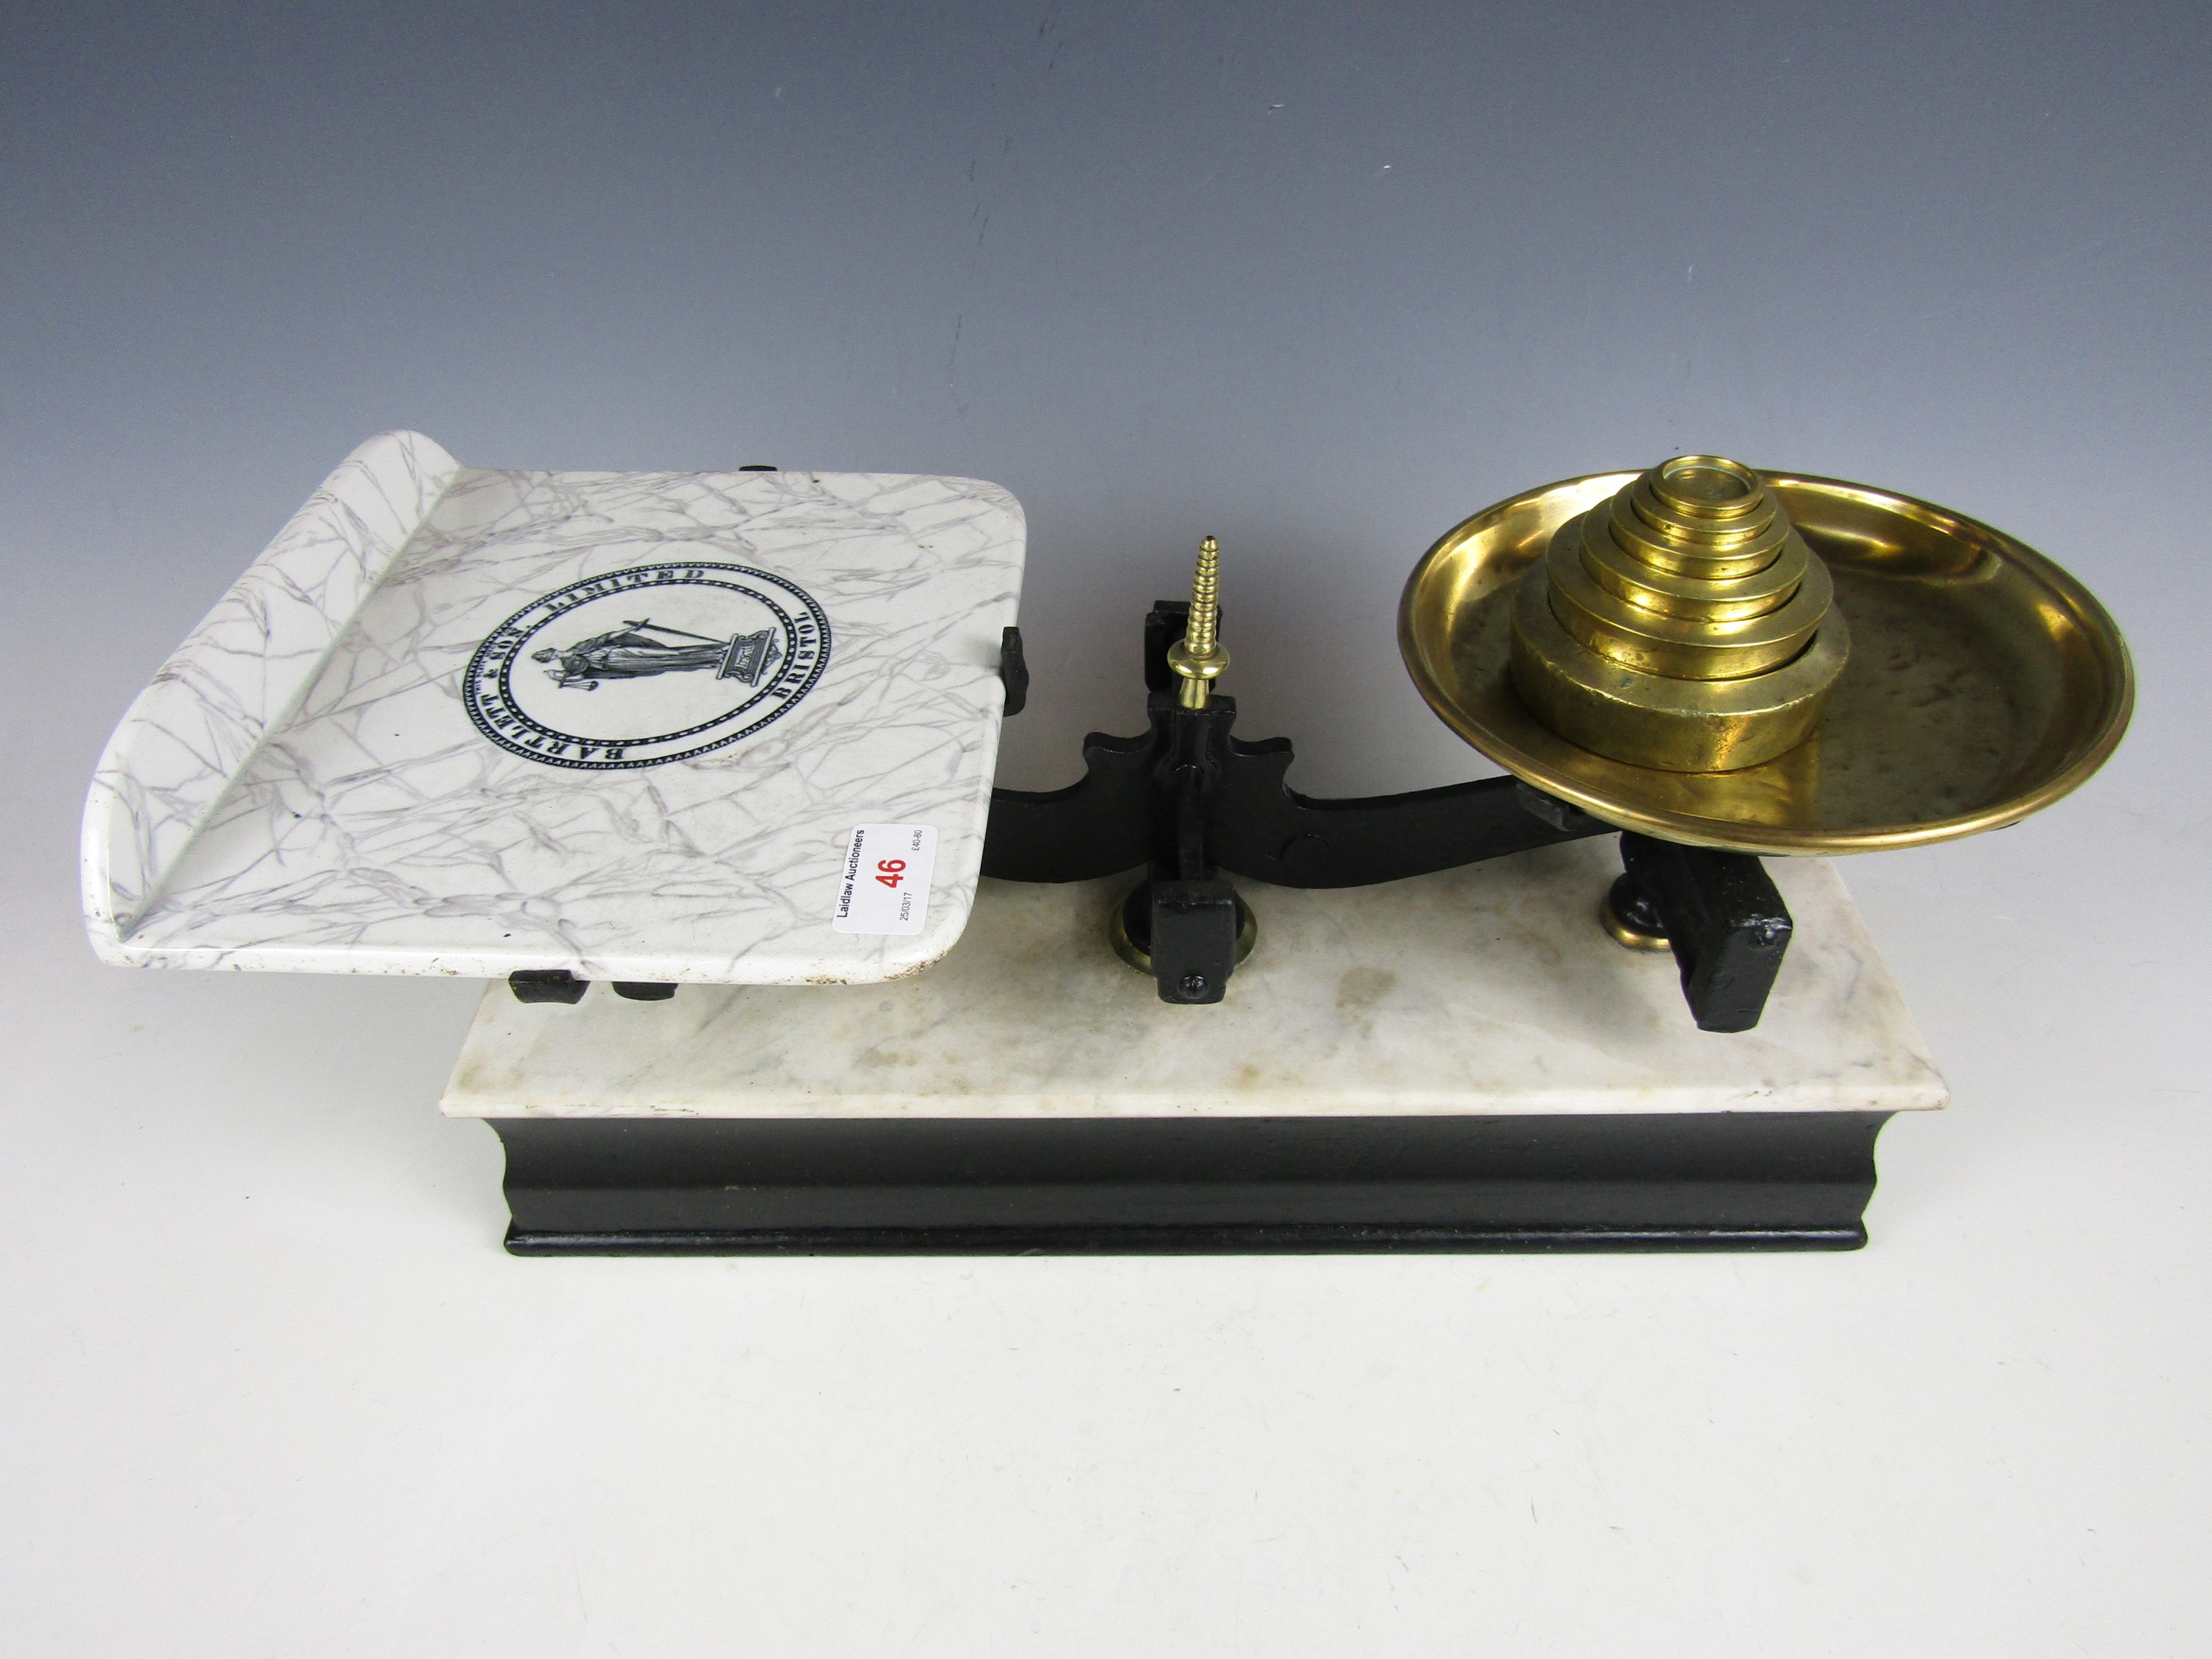 A Bartlett & Son Ltd set of balance scales with weights